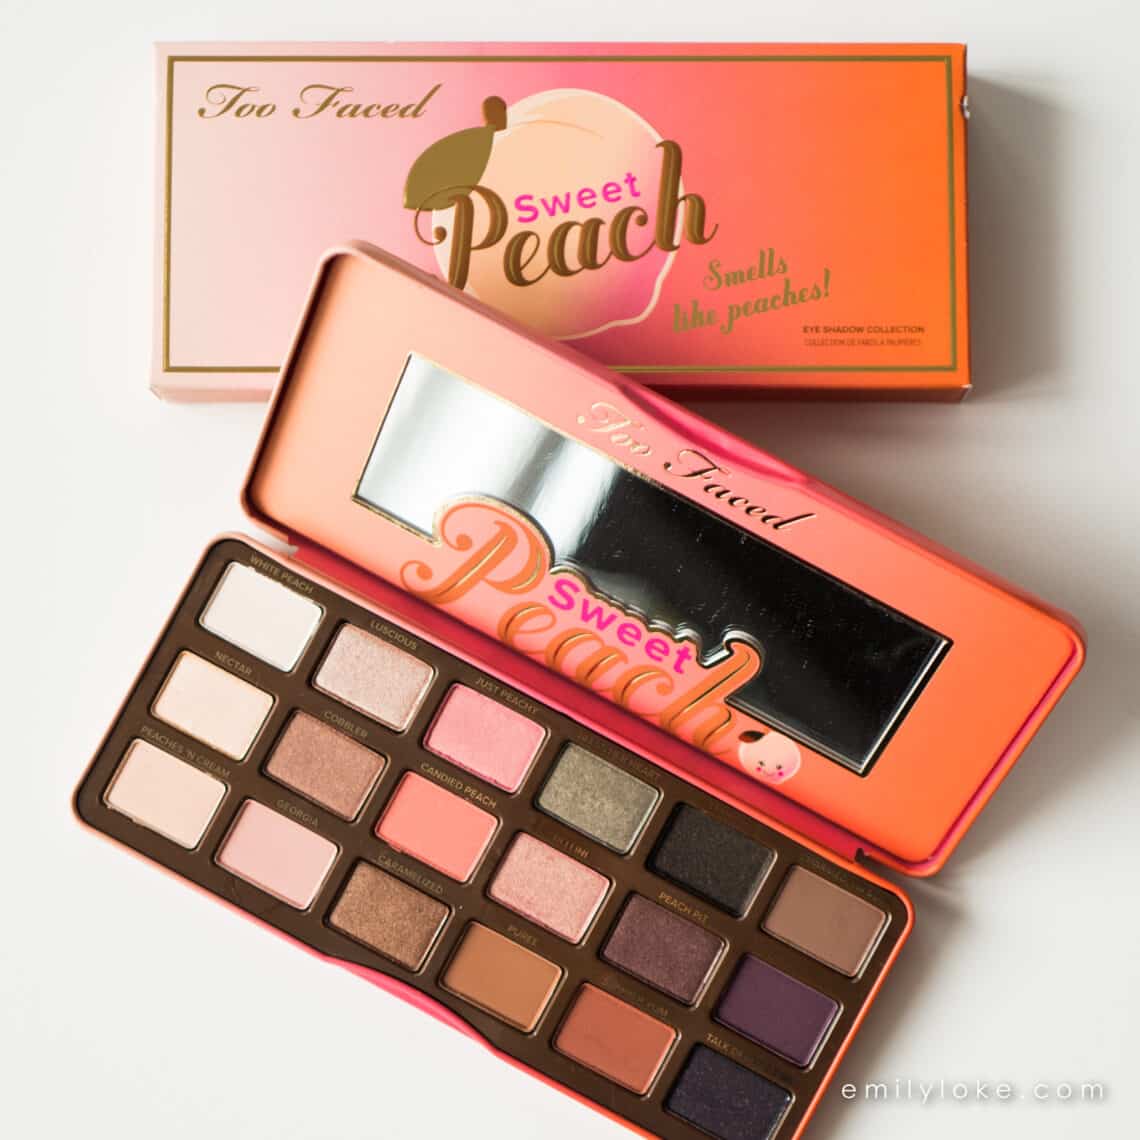 When does the peach palette come out